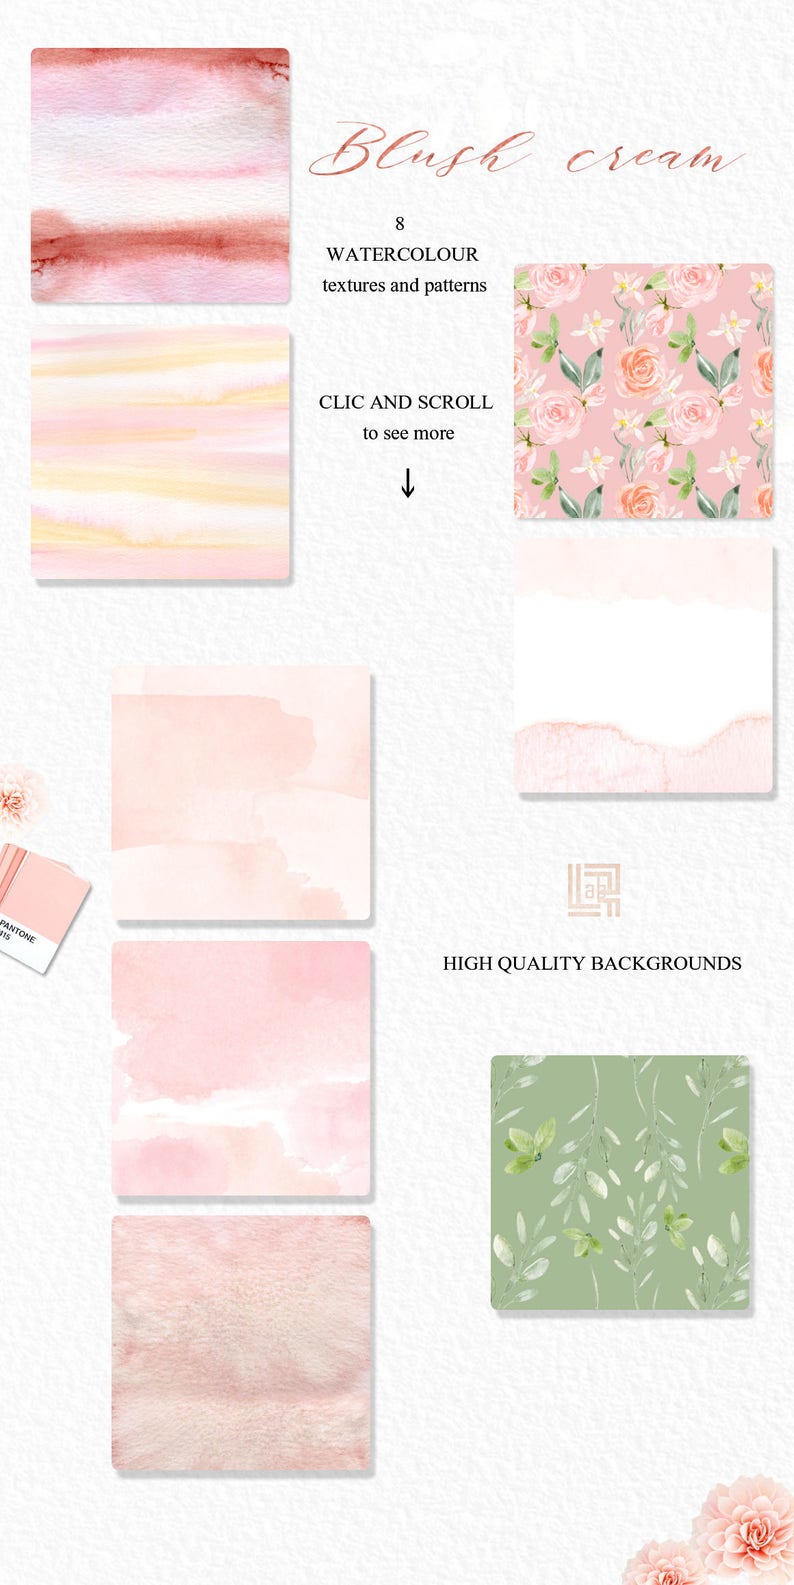 Blush cream watercolour flowers clipart, hand drawn: Elements, textures, patterns, washes. Soft blush pink and peach colors. Peonies. image 4